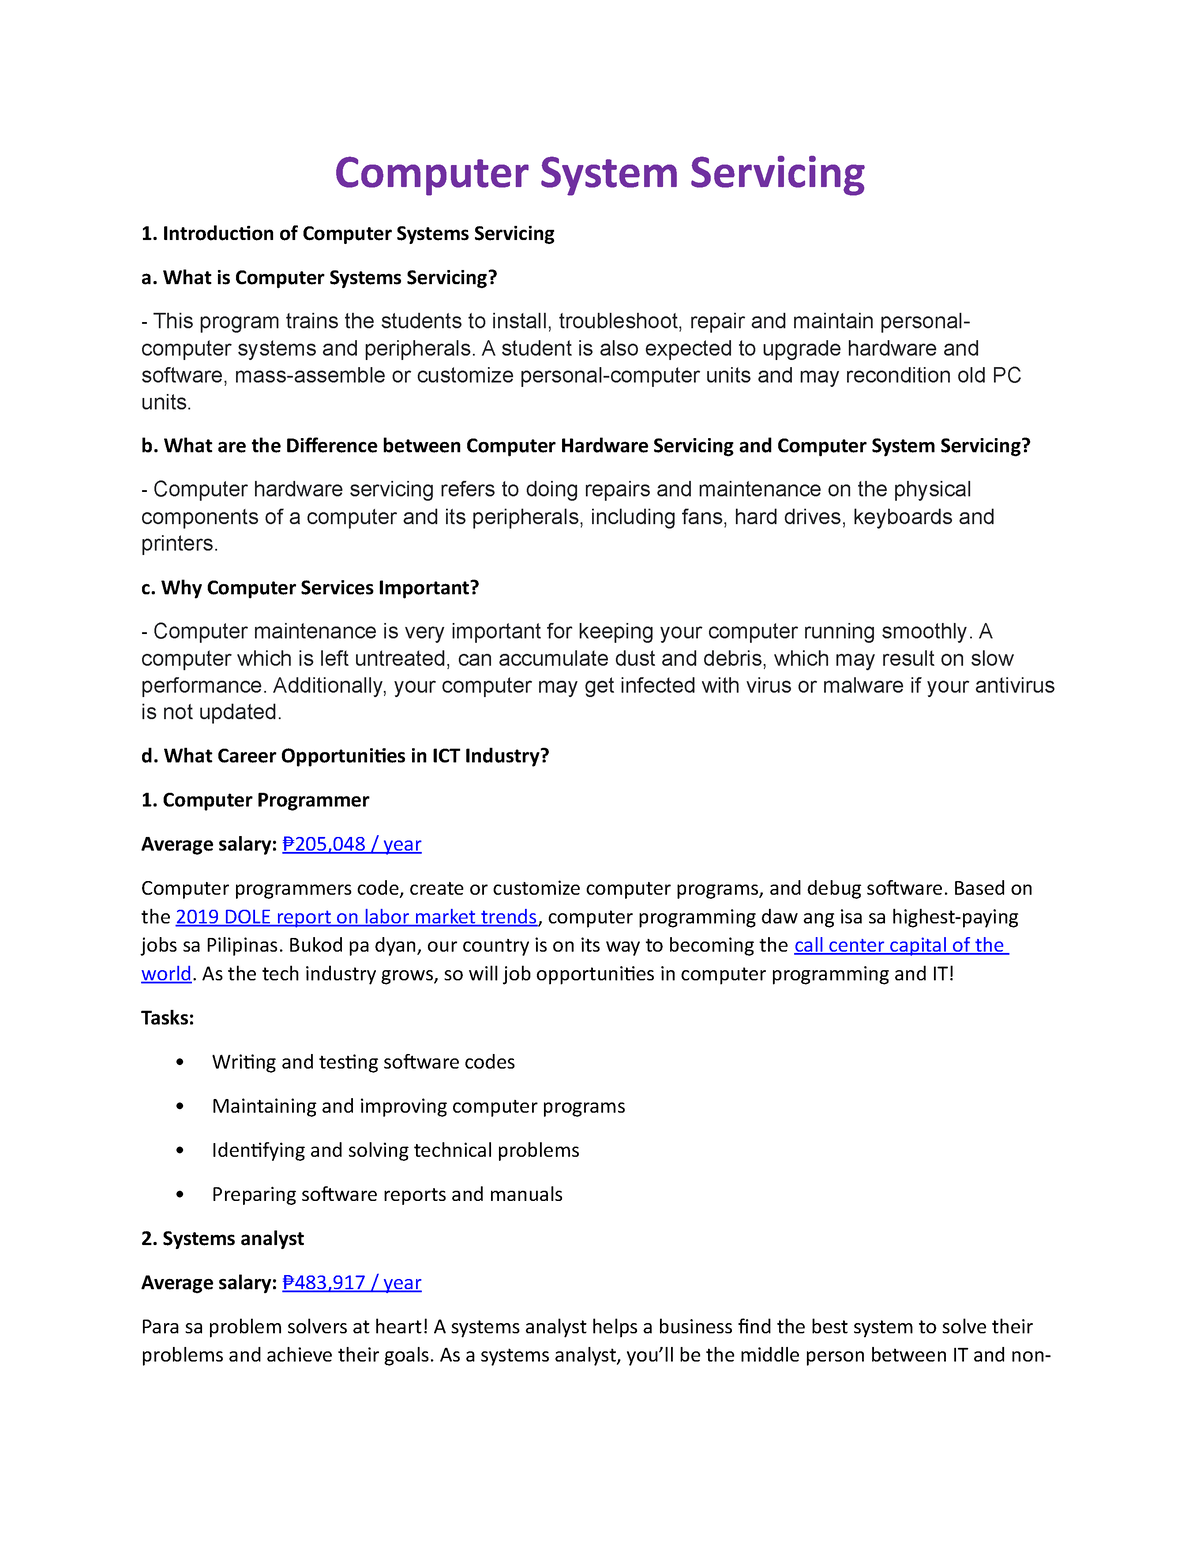 thesis title about computer system servicing